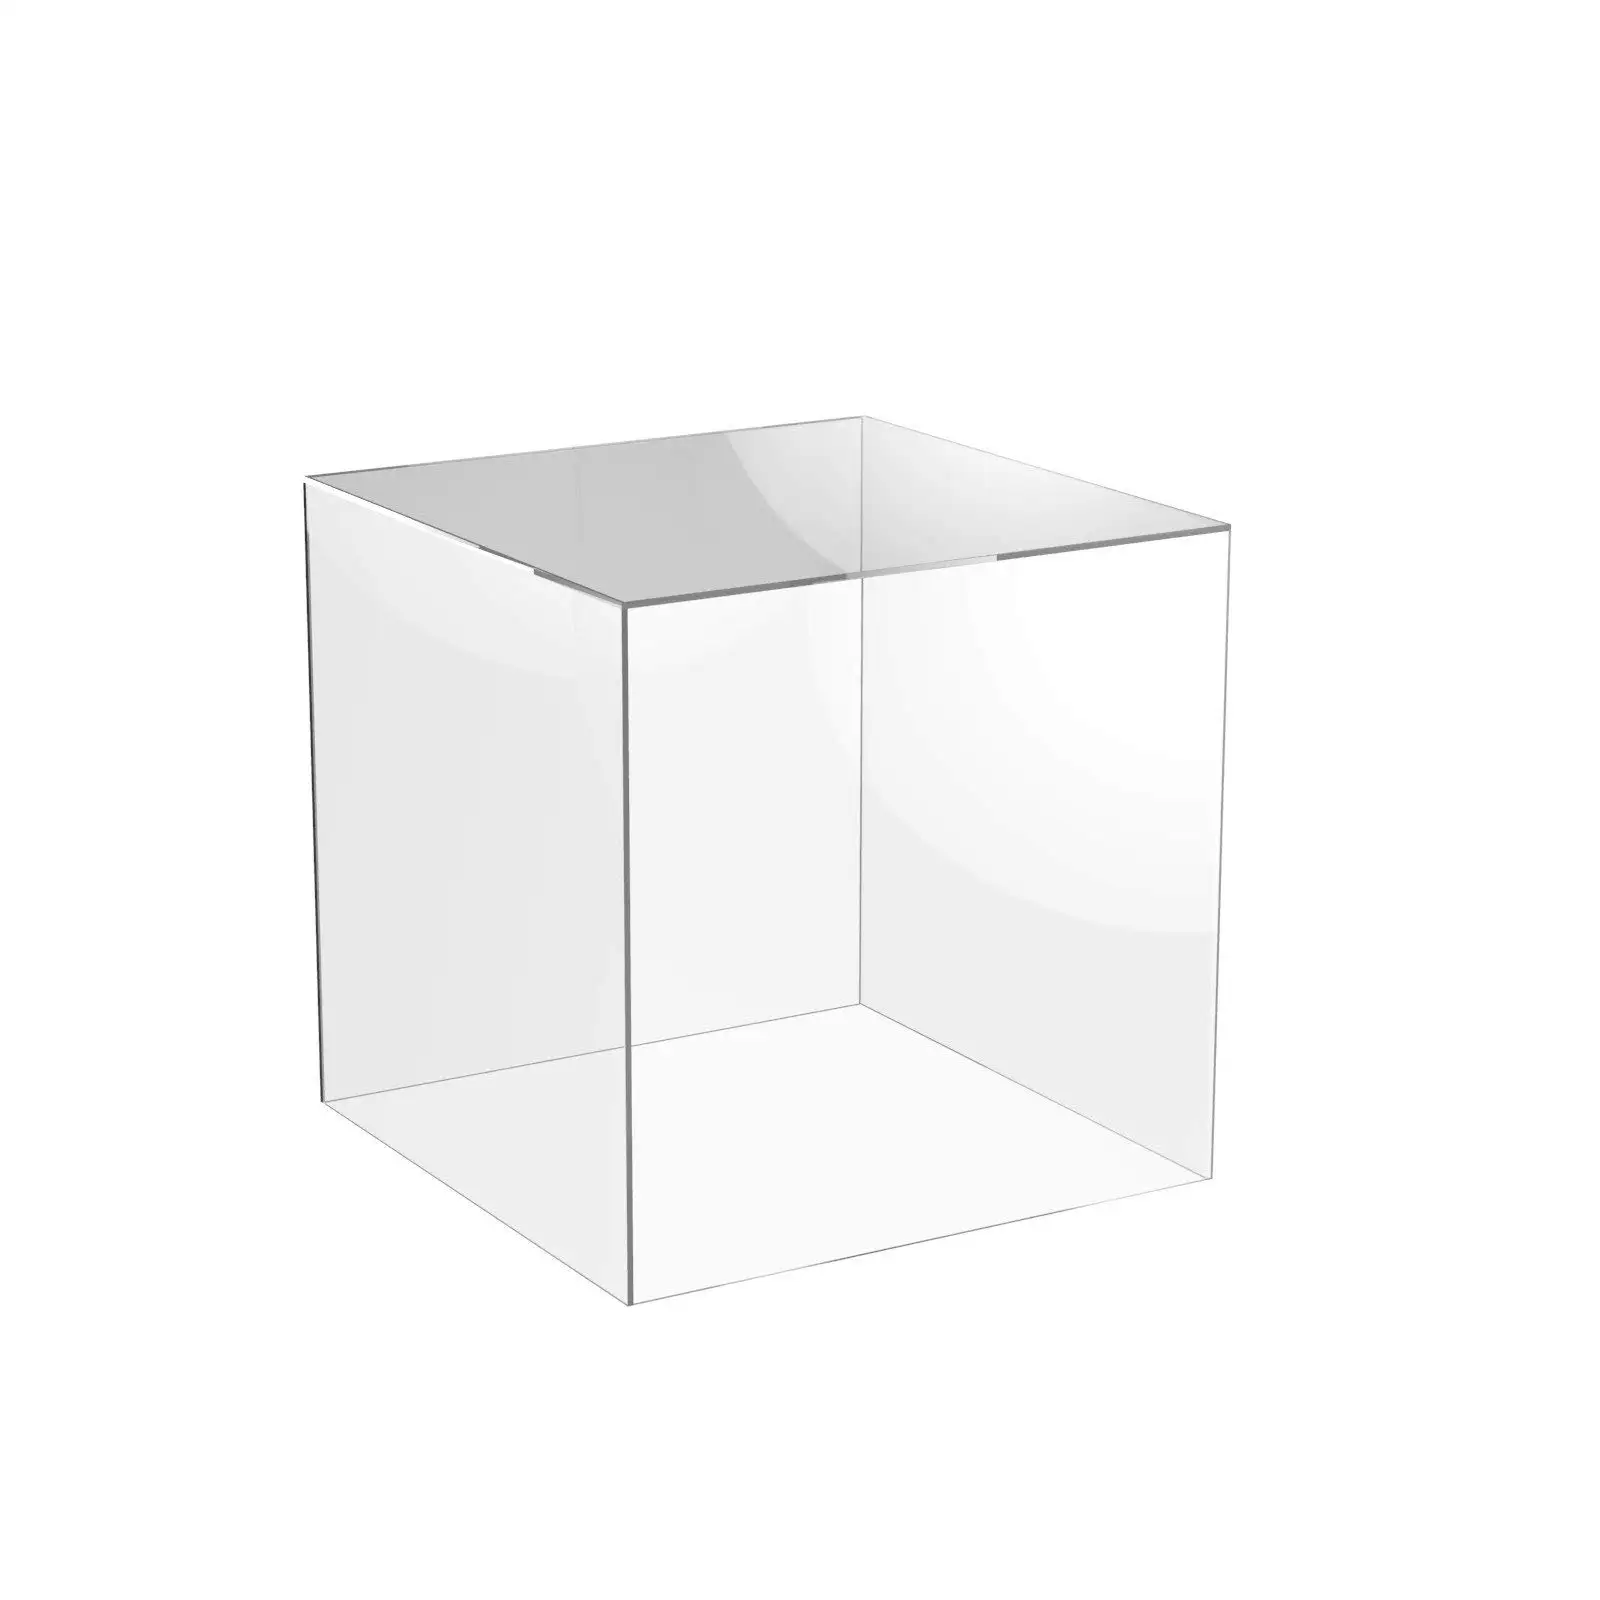 300mm 200mm 400mm Acrylic Display Cubes 5 Sided Open 1 End 4 Sizes 100mm 